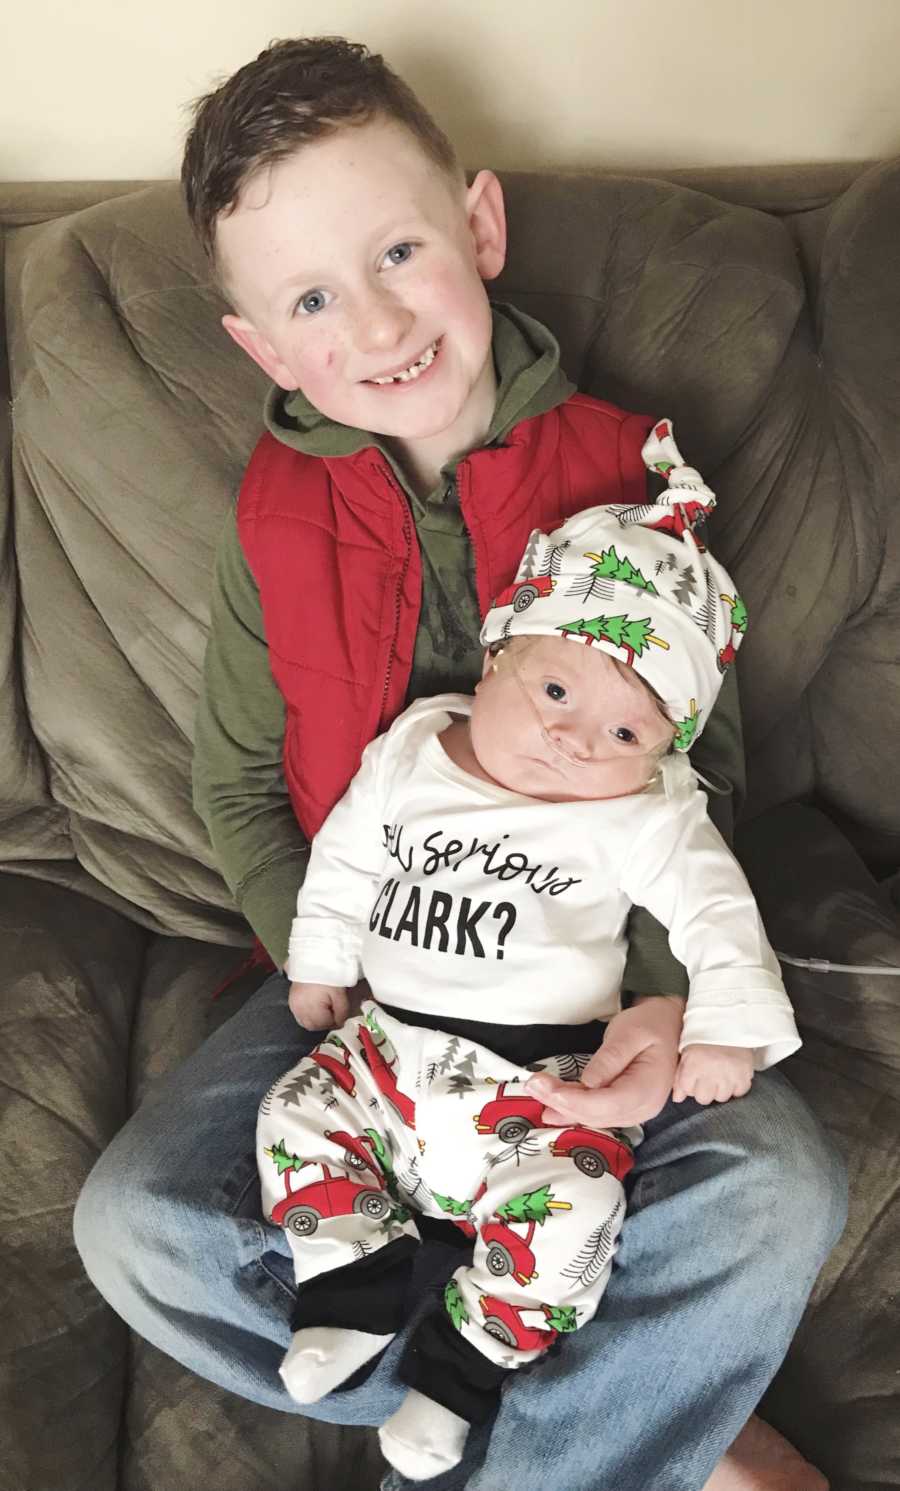 Little boy smiles as he sits on couch holding baby brother on oxygen in his lap